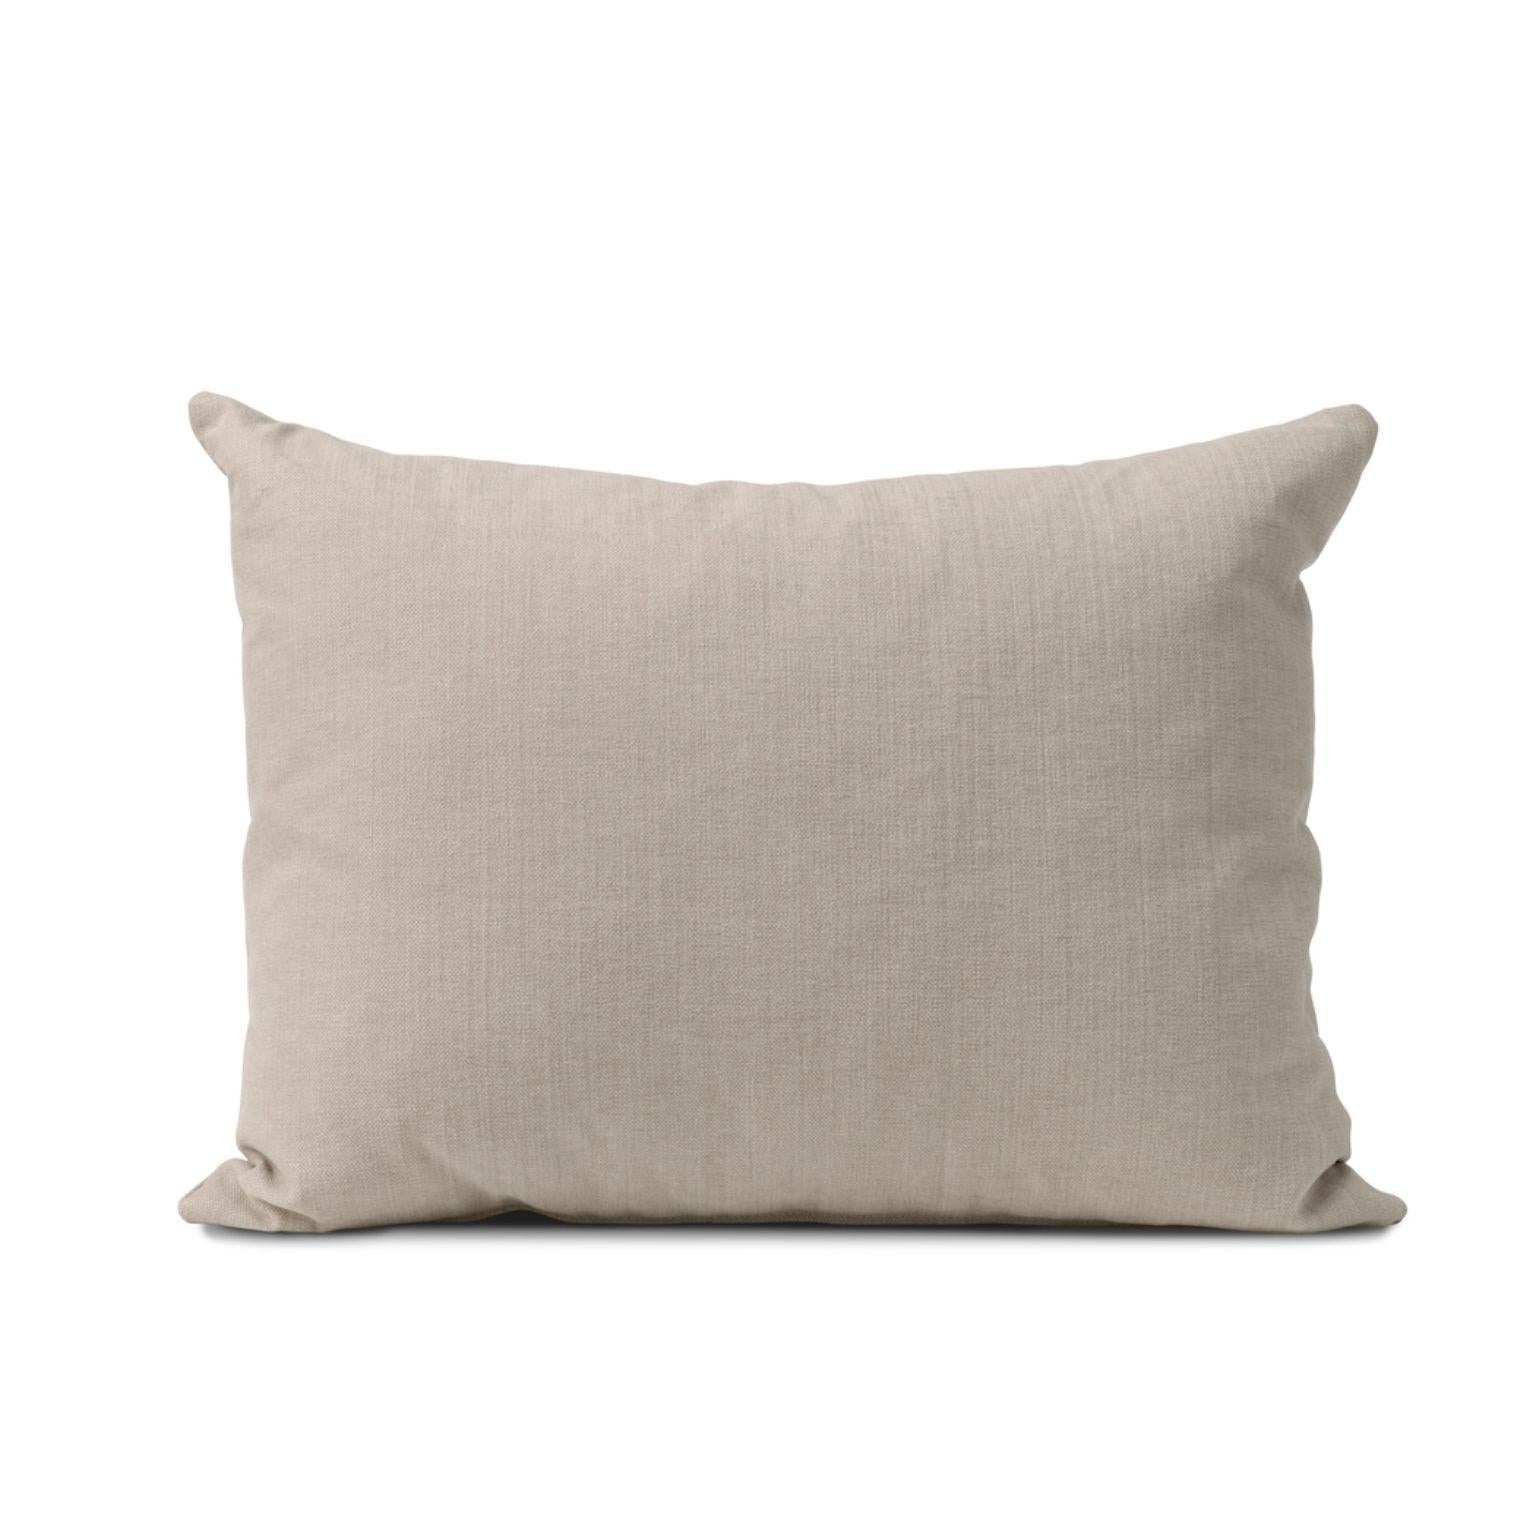 Galore cushion square linen by Warm Nordic.
Dimensions: D70 x H 50 cm.
Material: Textile upholstery, Granulate and feathers filling.
Weight: 1.4 kg
Also available in different colours and finishes. 

An elegant oversized sofa cushion, which